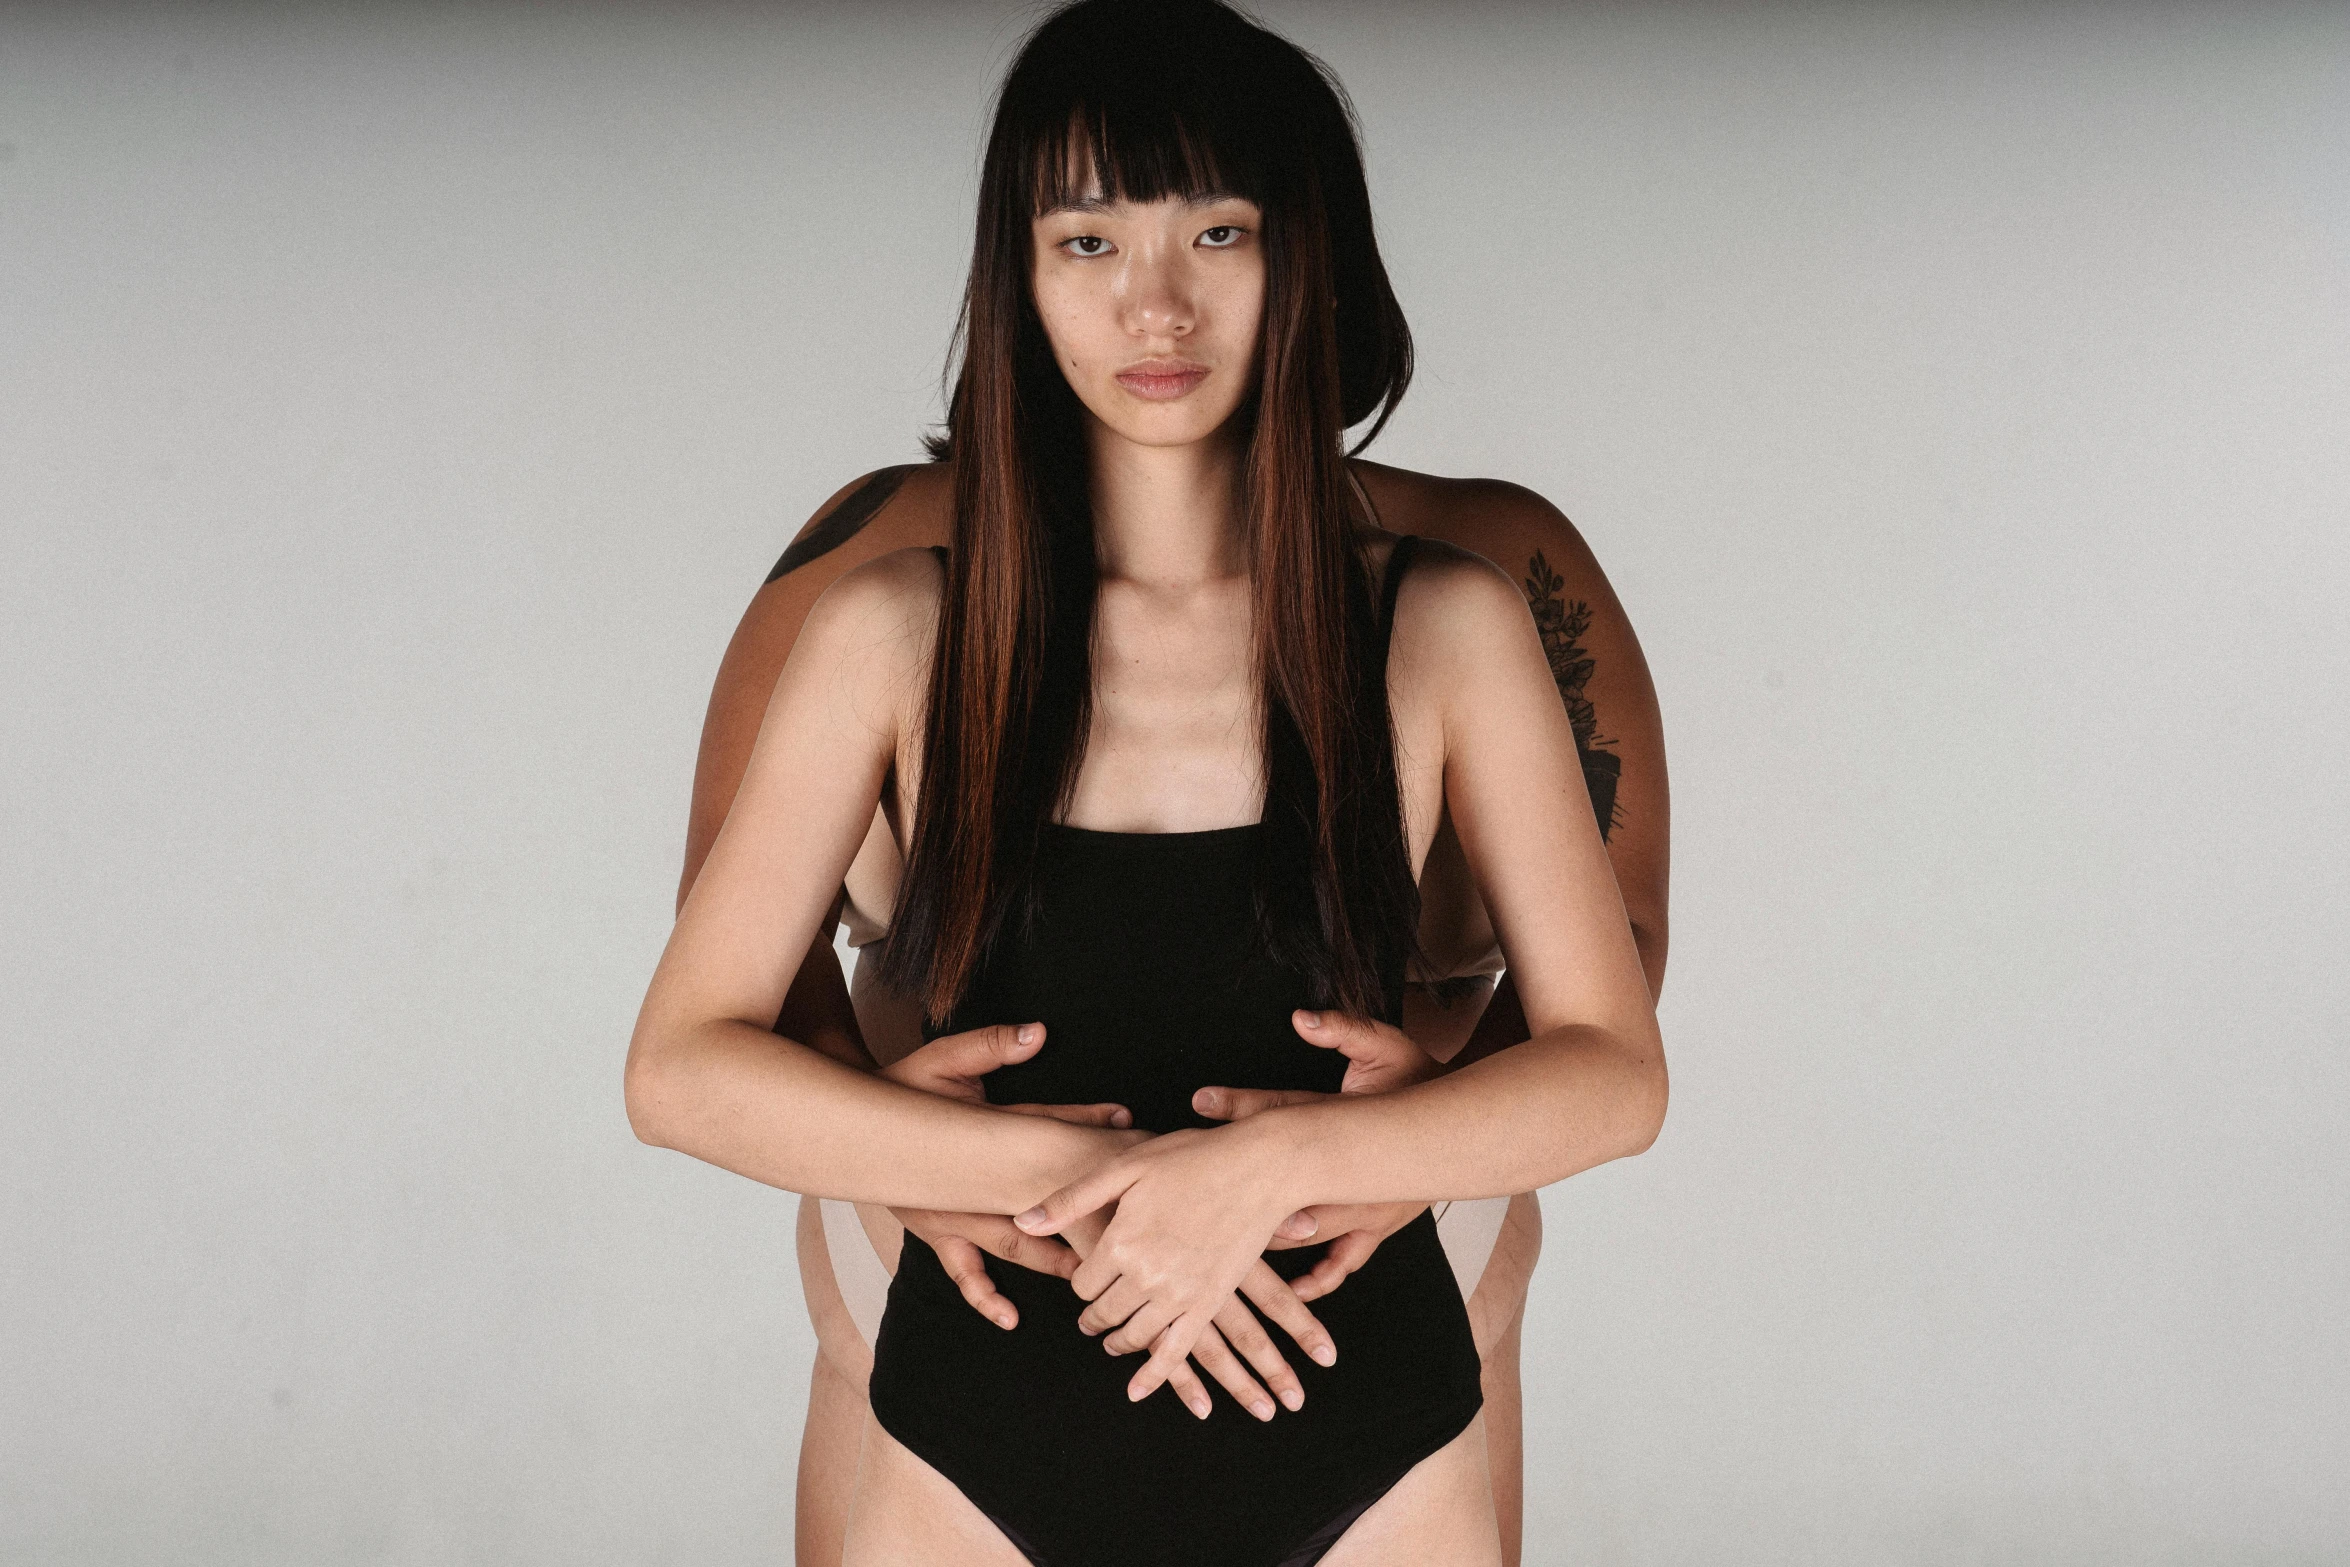 a man and a woman standing next to each other, an album cover, inspired by Wang Duo, wearing a black bodysuit, gongbi, intimately holding close, lynn skordal